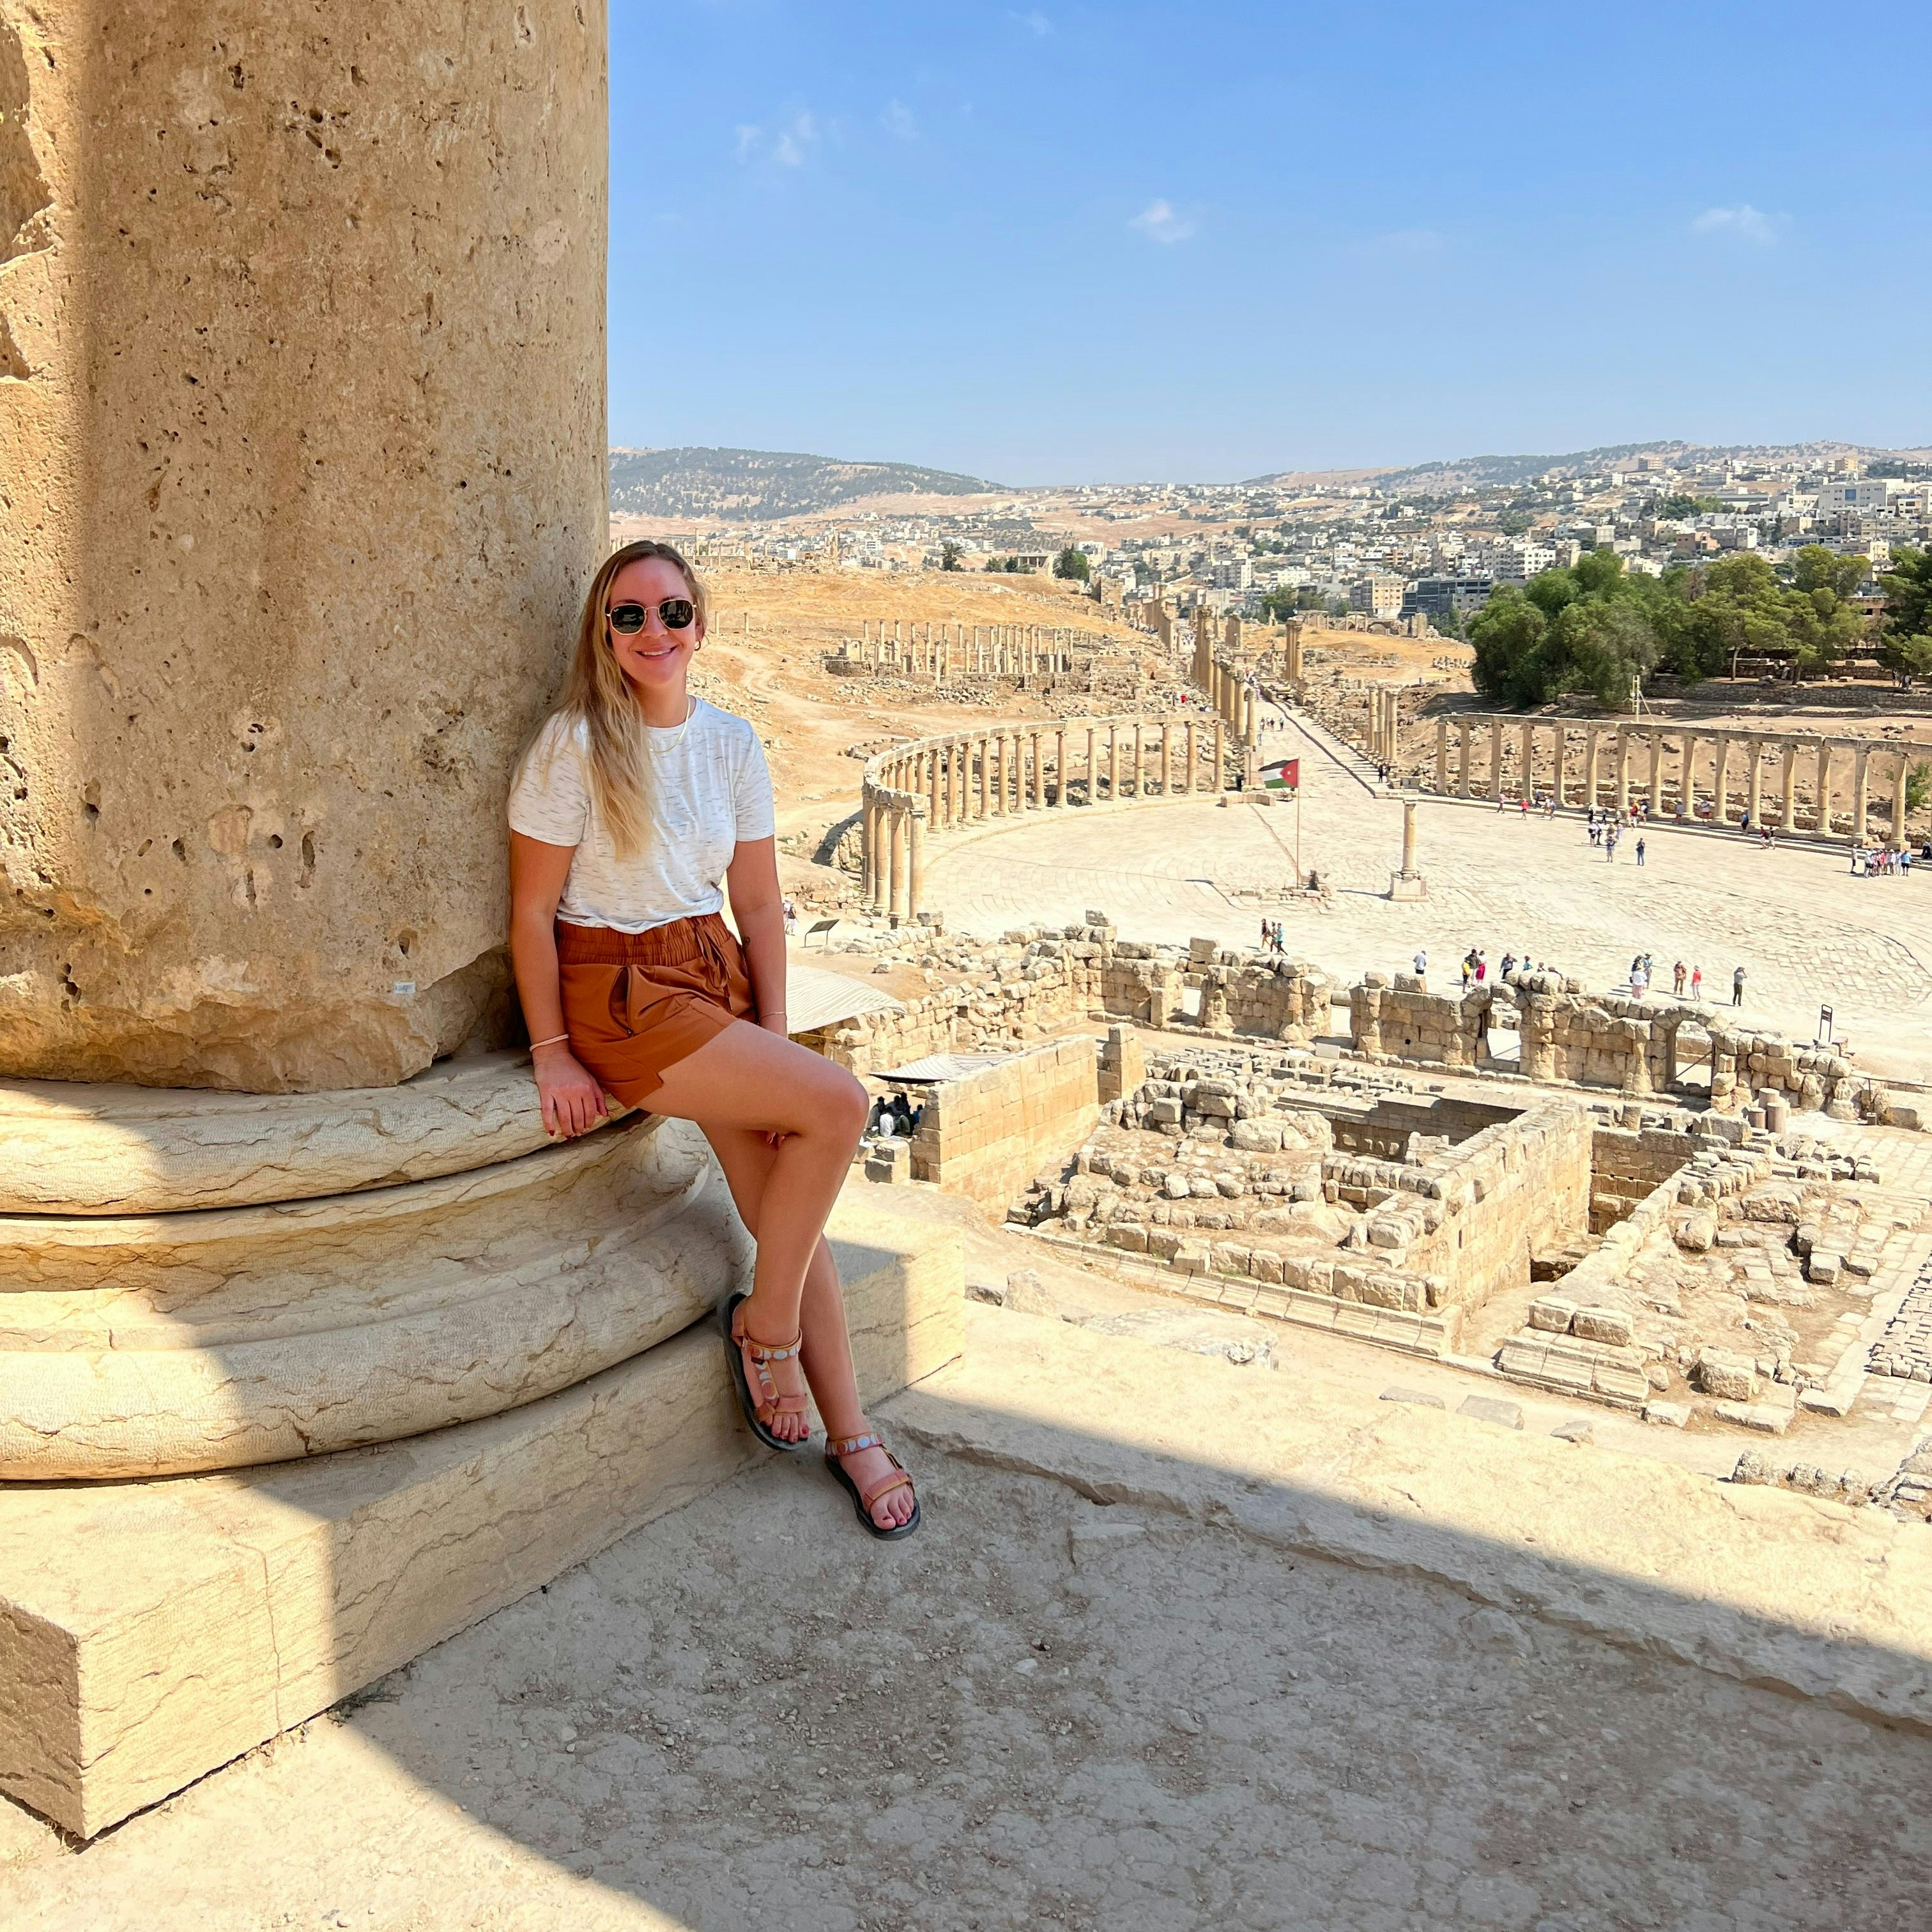 Travel advisor Kristen Wilkinson posing in white top against a pillar overlooking an ancient archeological site